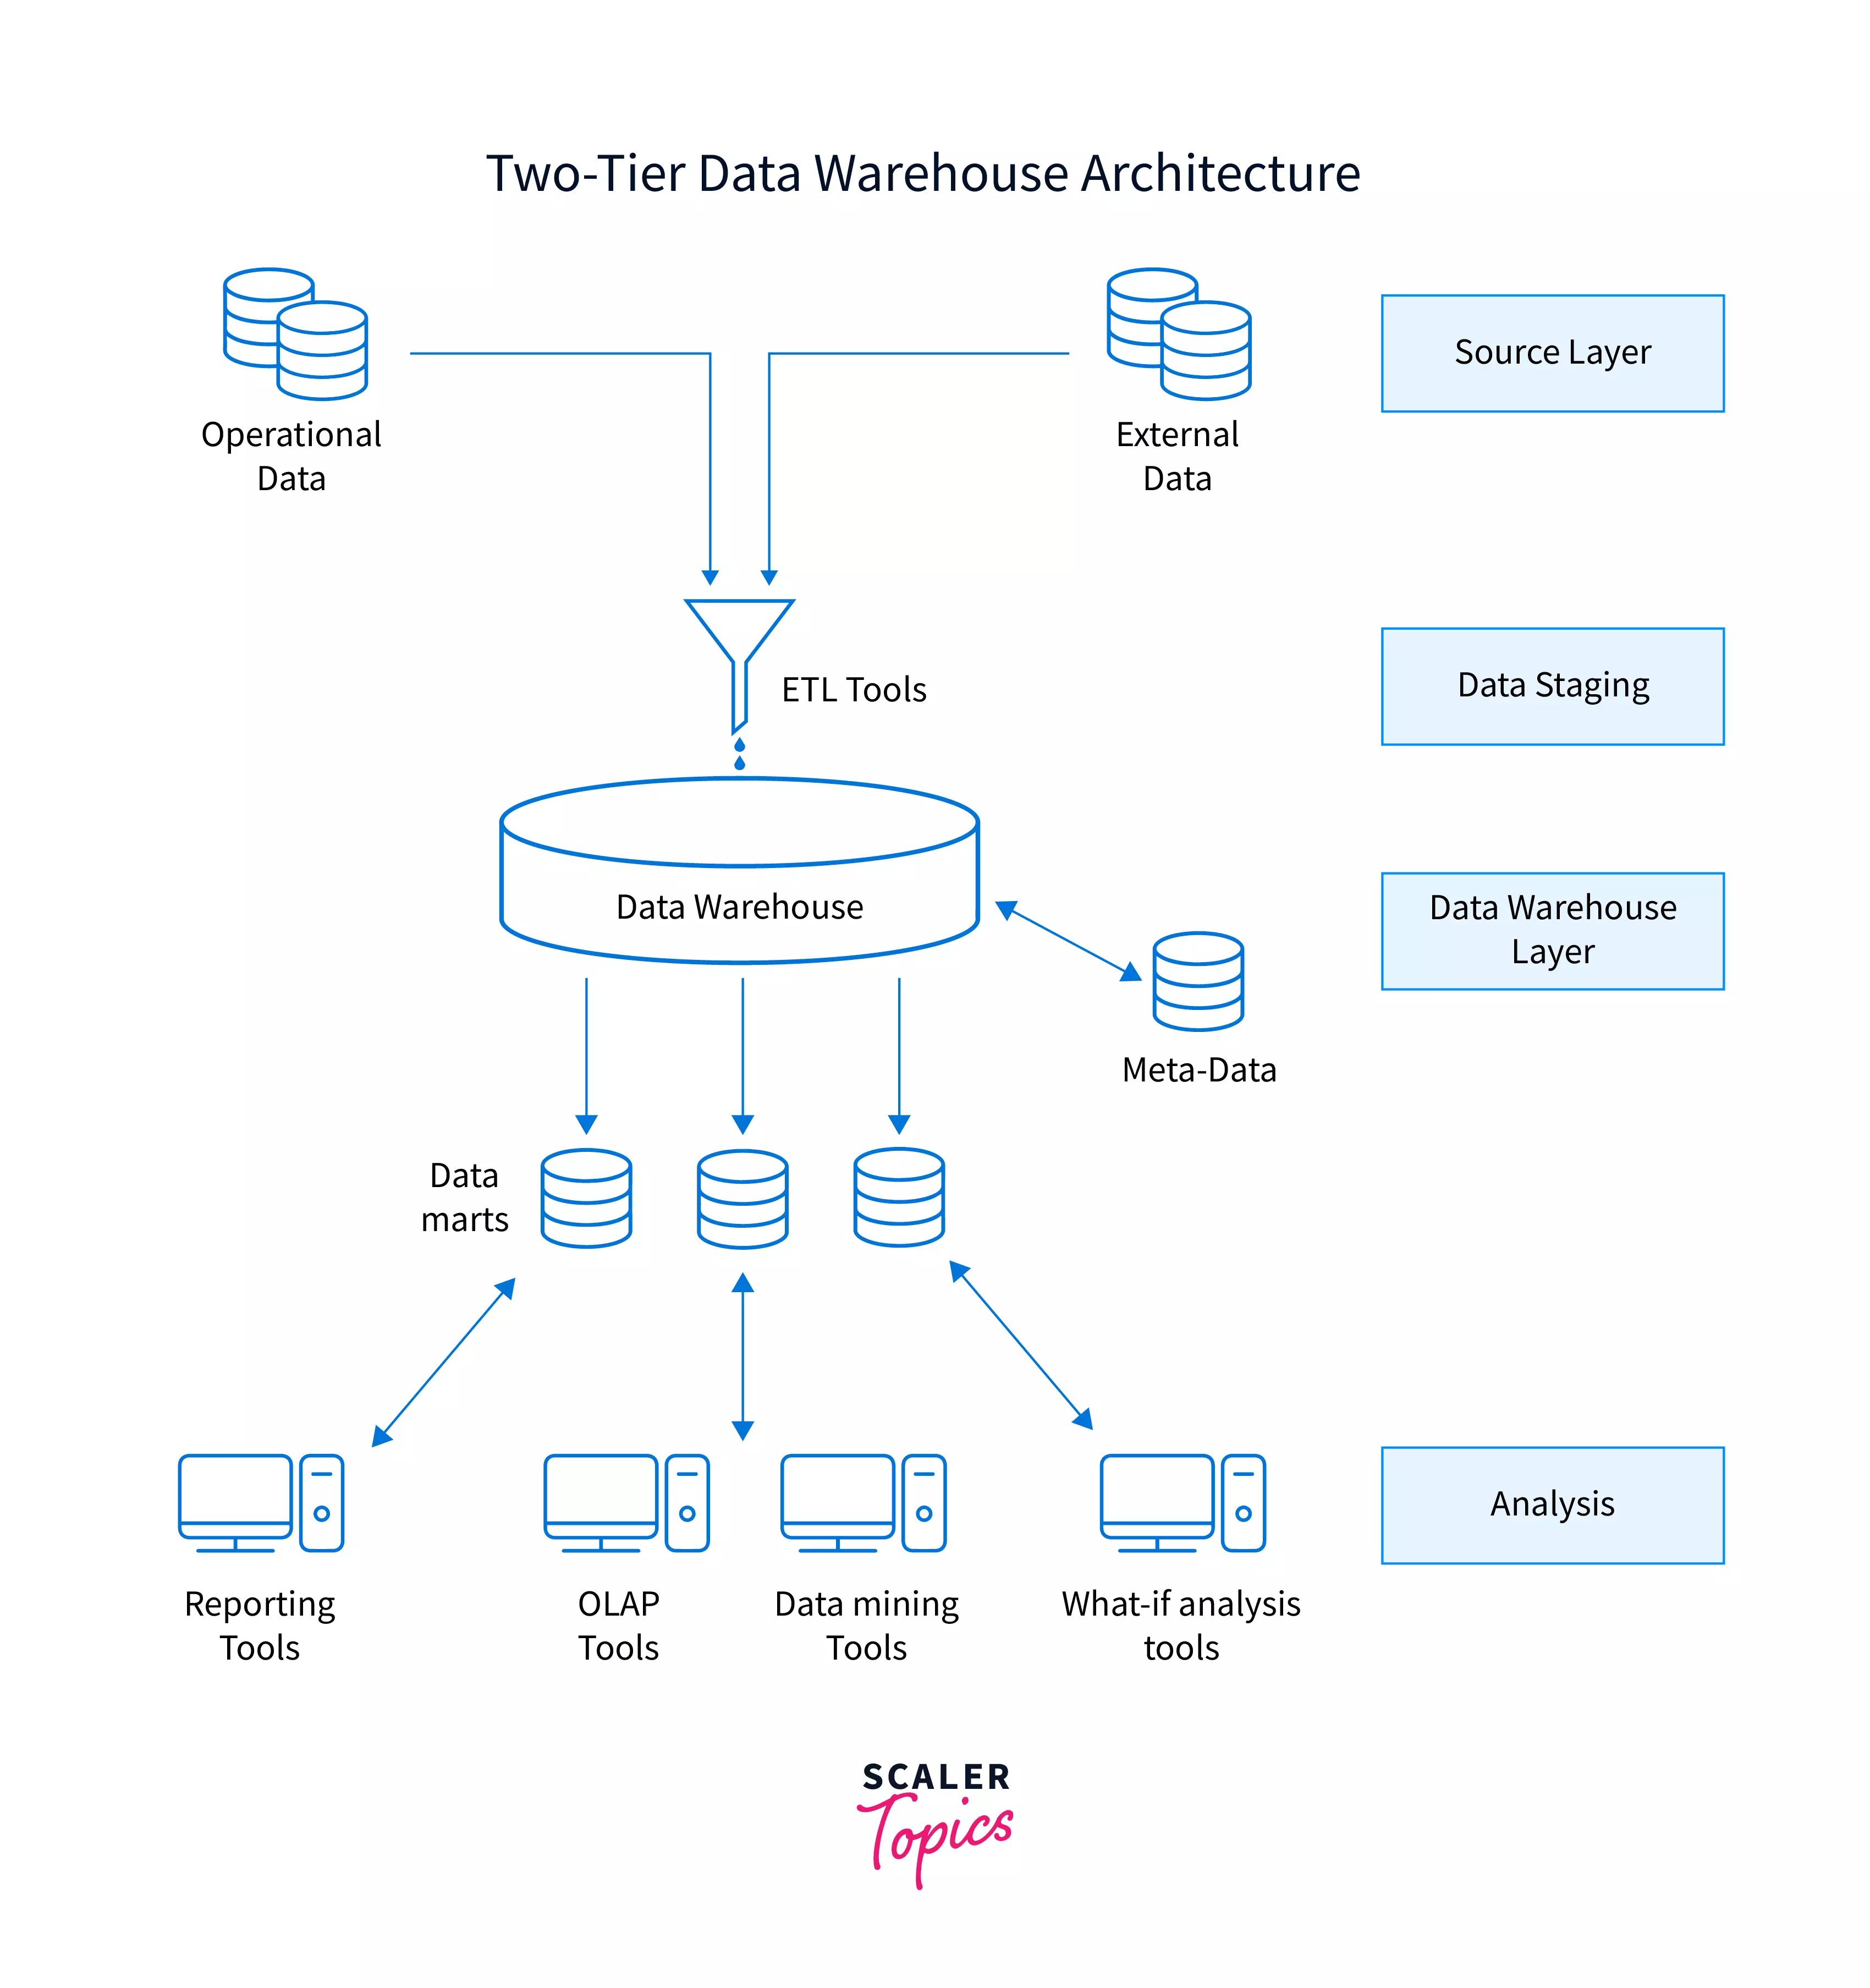 two-tier data warehouse architecture image